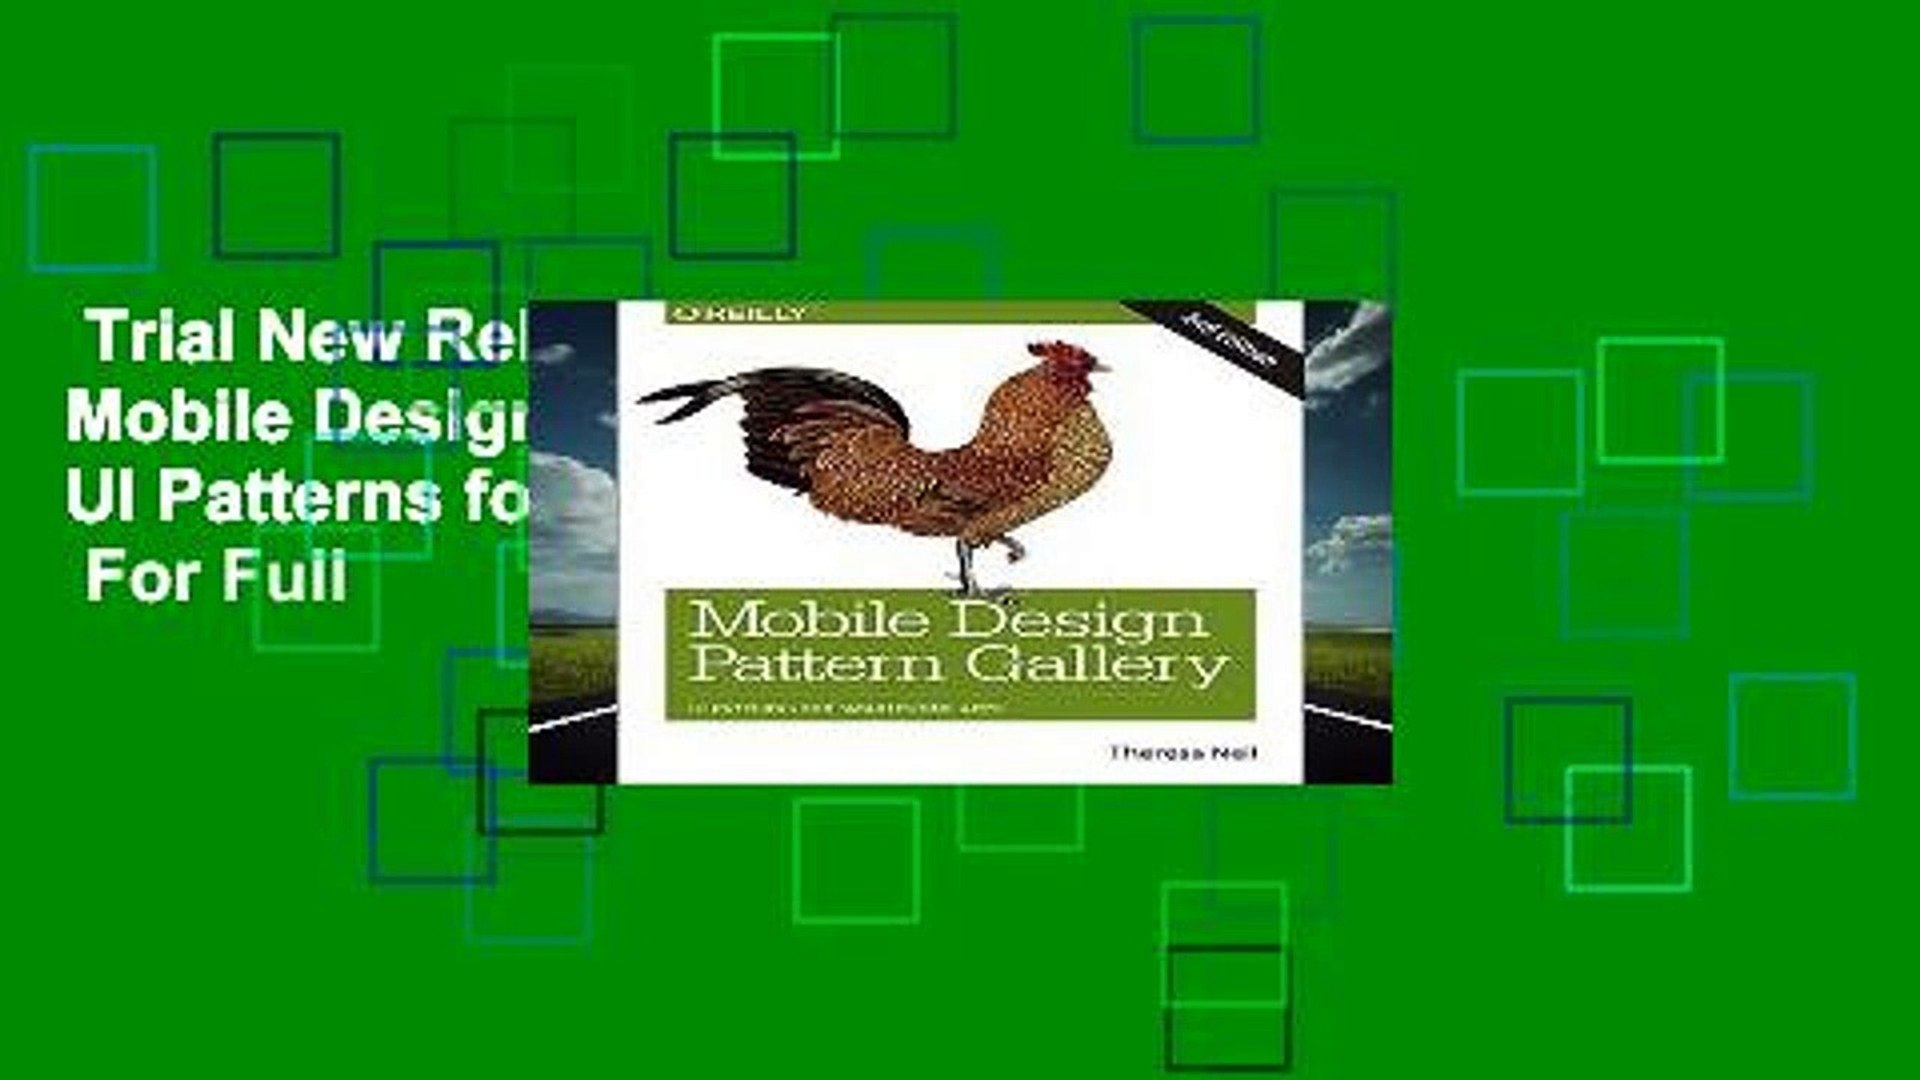 Trial New Releases  Mobile Design Pattern Gallery: UI Patterns for Smartphone Apps  For Full